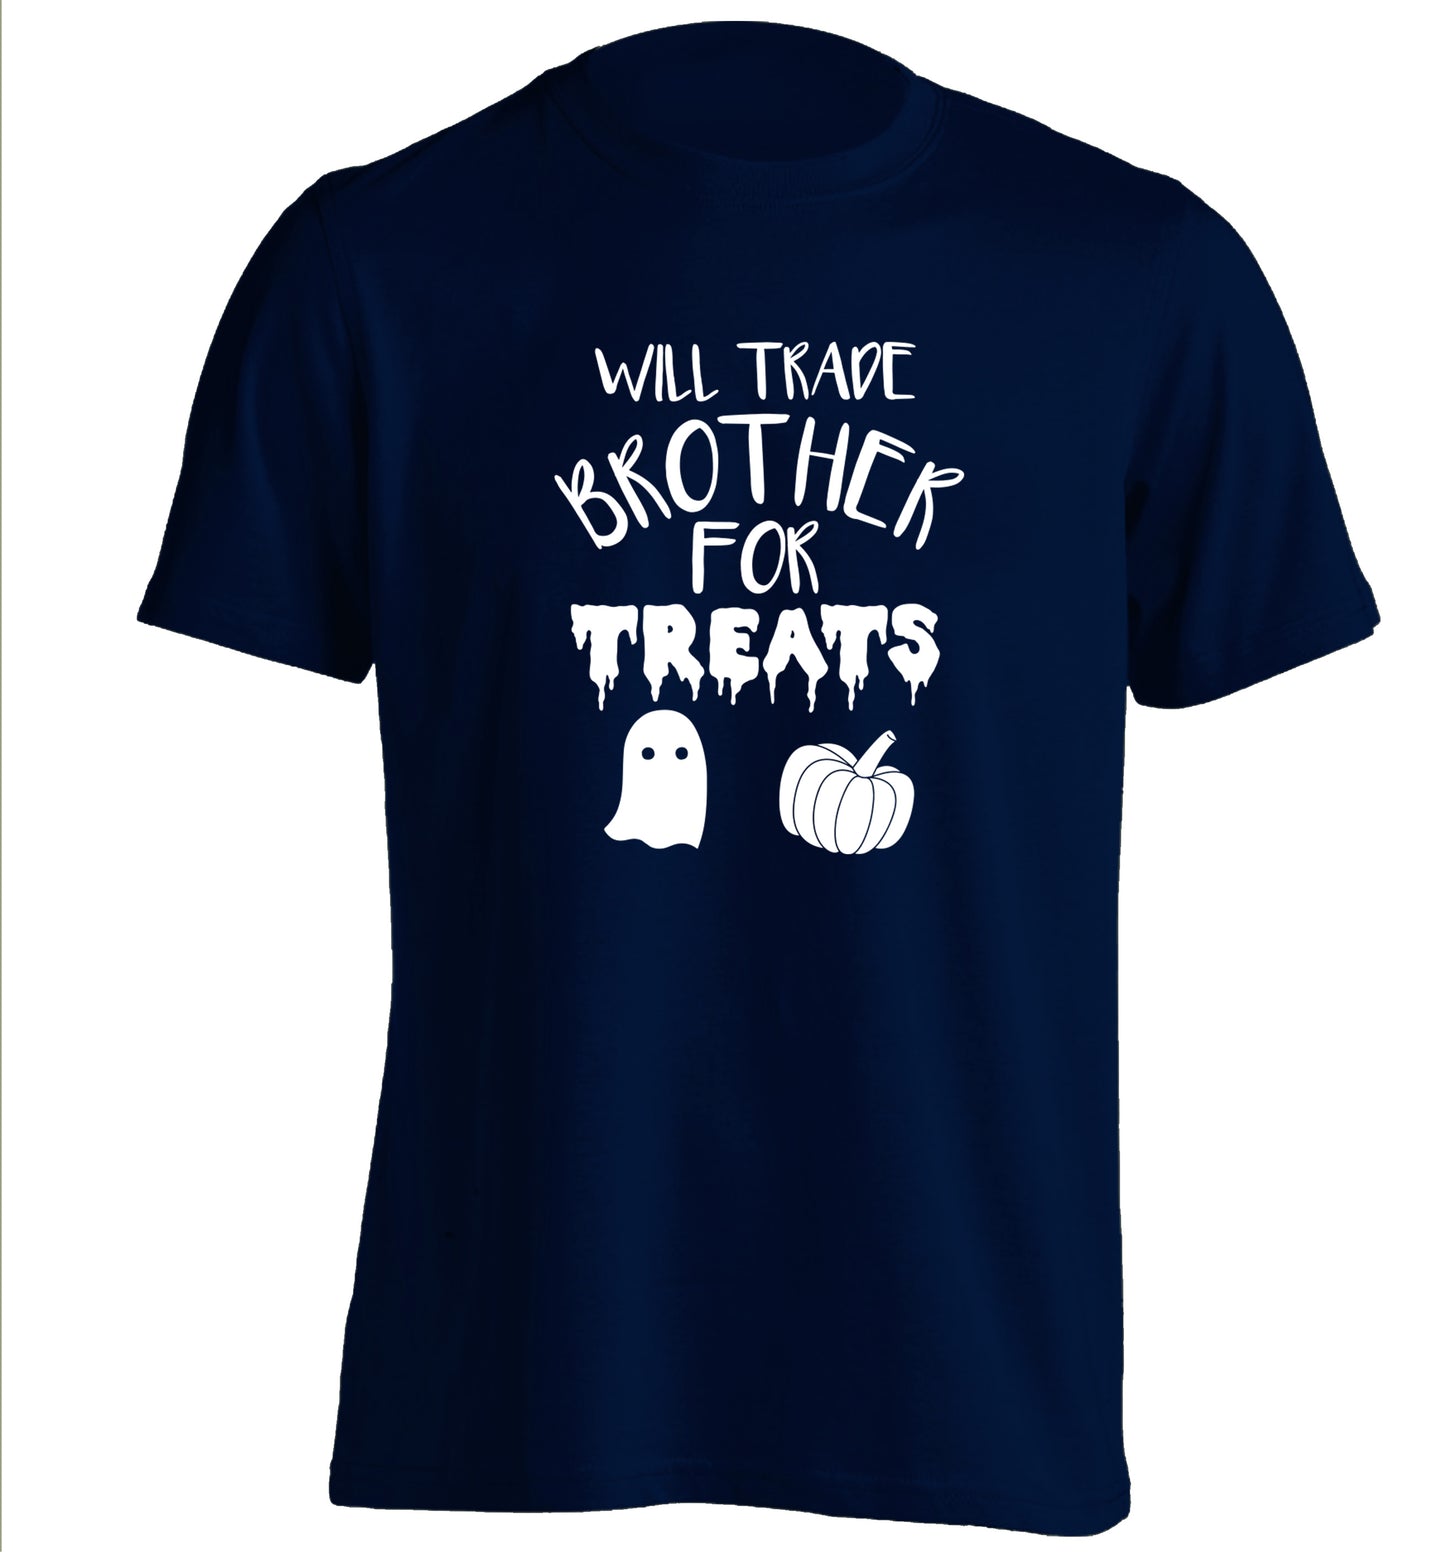 Will trade brother for sweets adults unisex navy Tshirt 2XL